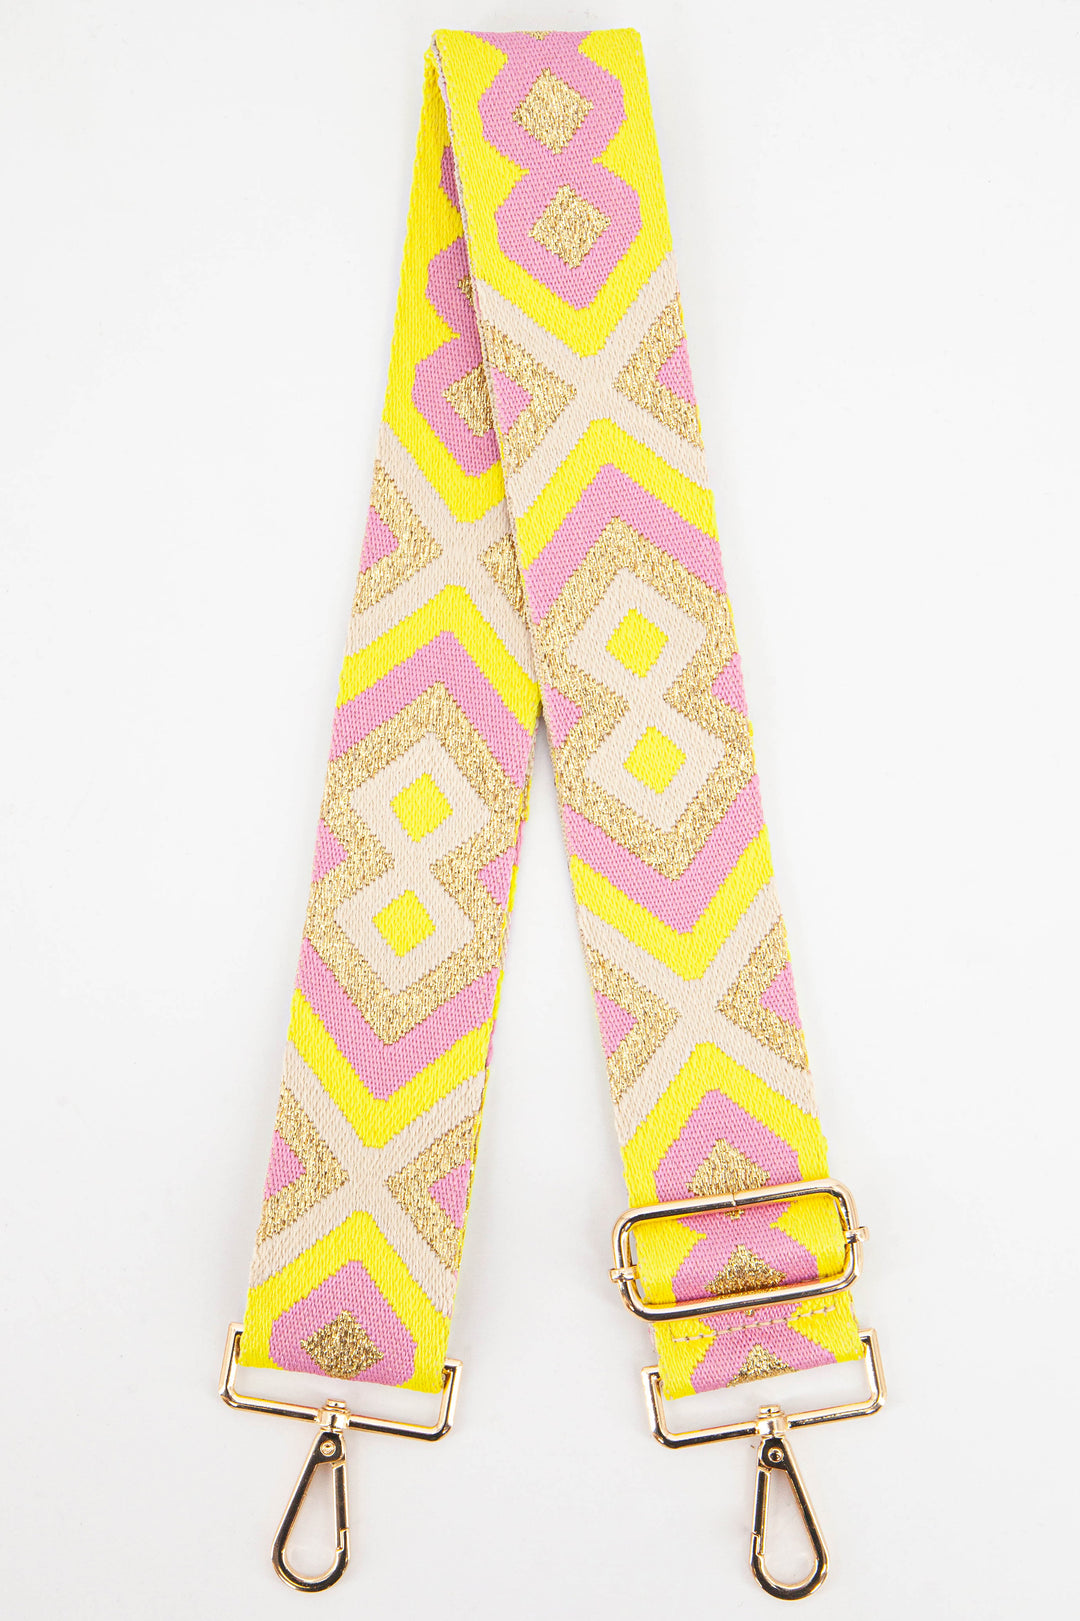 wide woven bag strap with a yellow and pink aztec print with gold metallic glitter threading throughout